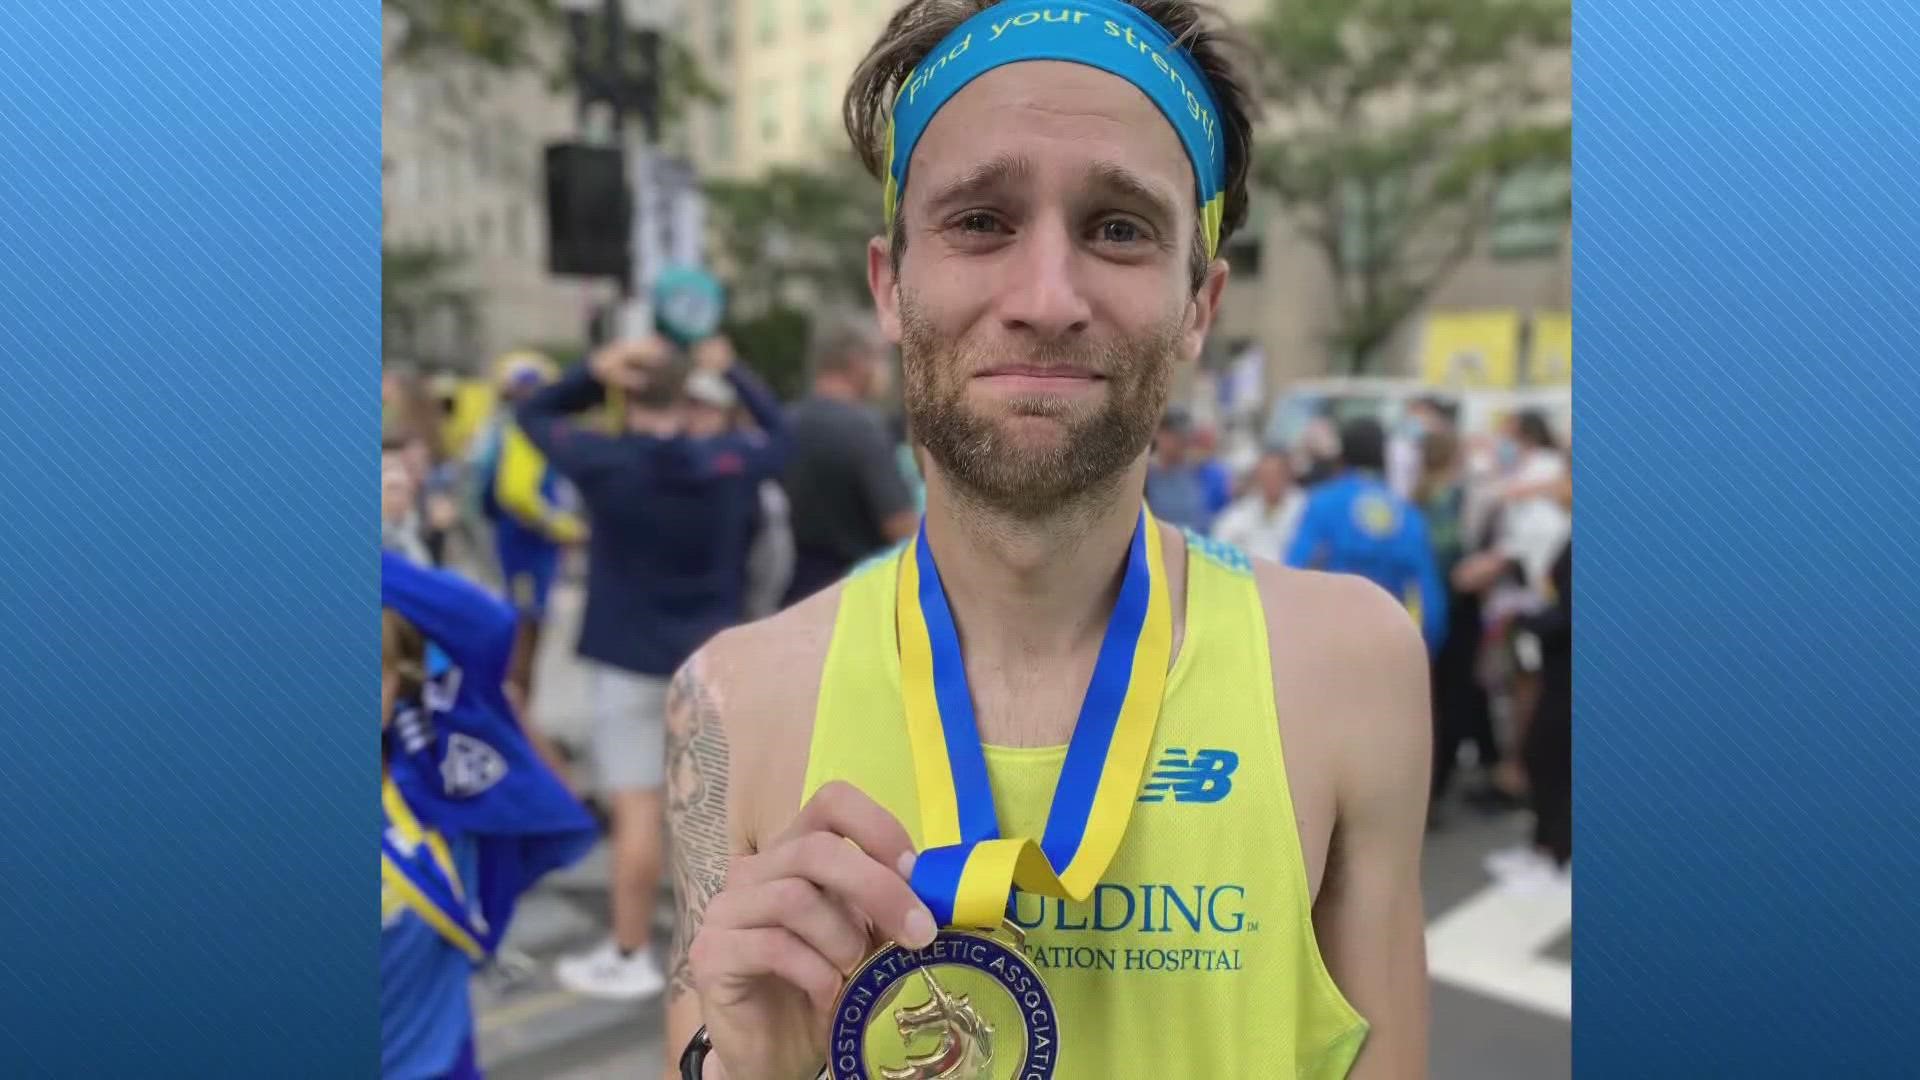 Chris Barr, whose body was partially paralyzed after a traumatic brain injury, ran the Boston Marathon for the hospital that saved his life.